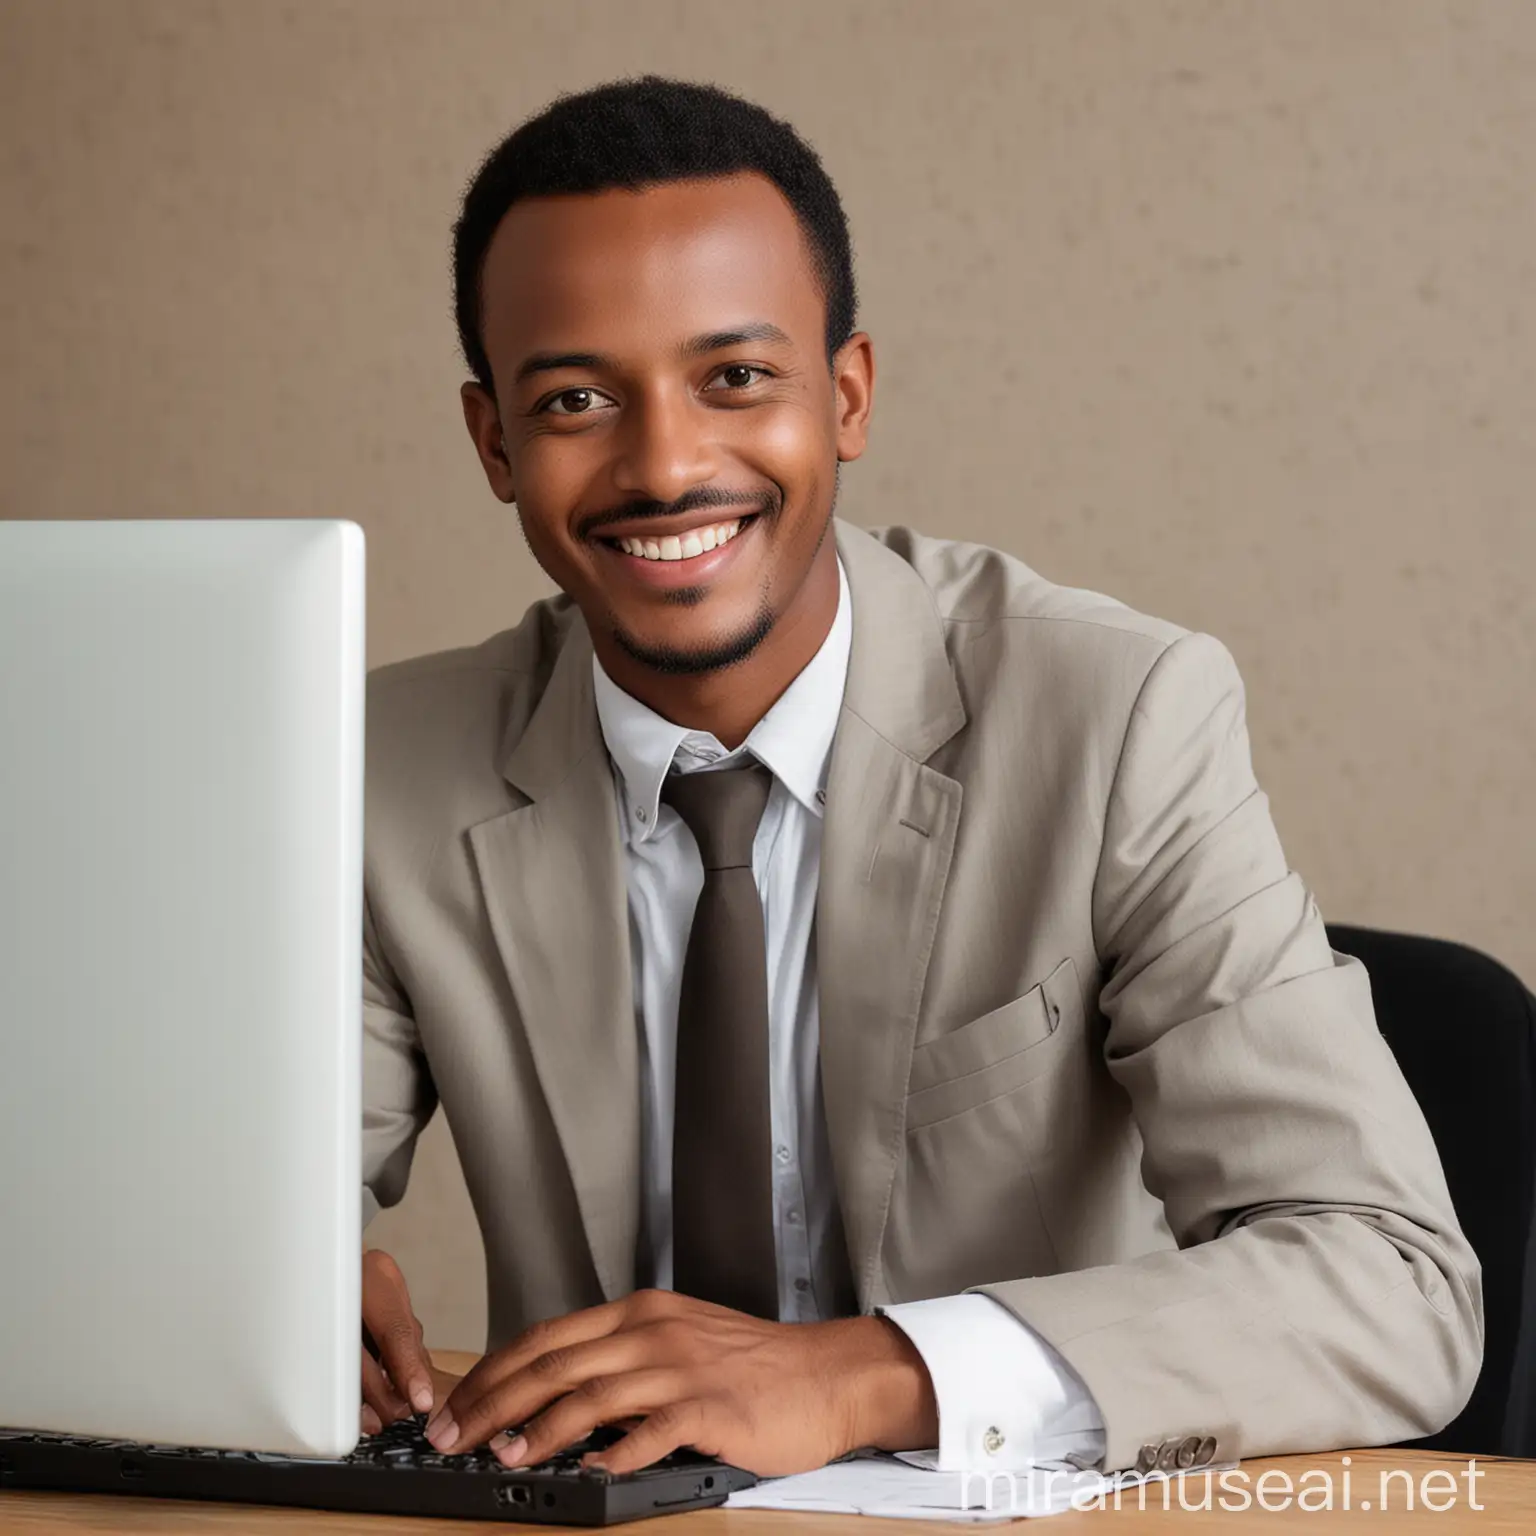 Ethiopian Professional Man Working on Computer with Smiling Demeanor